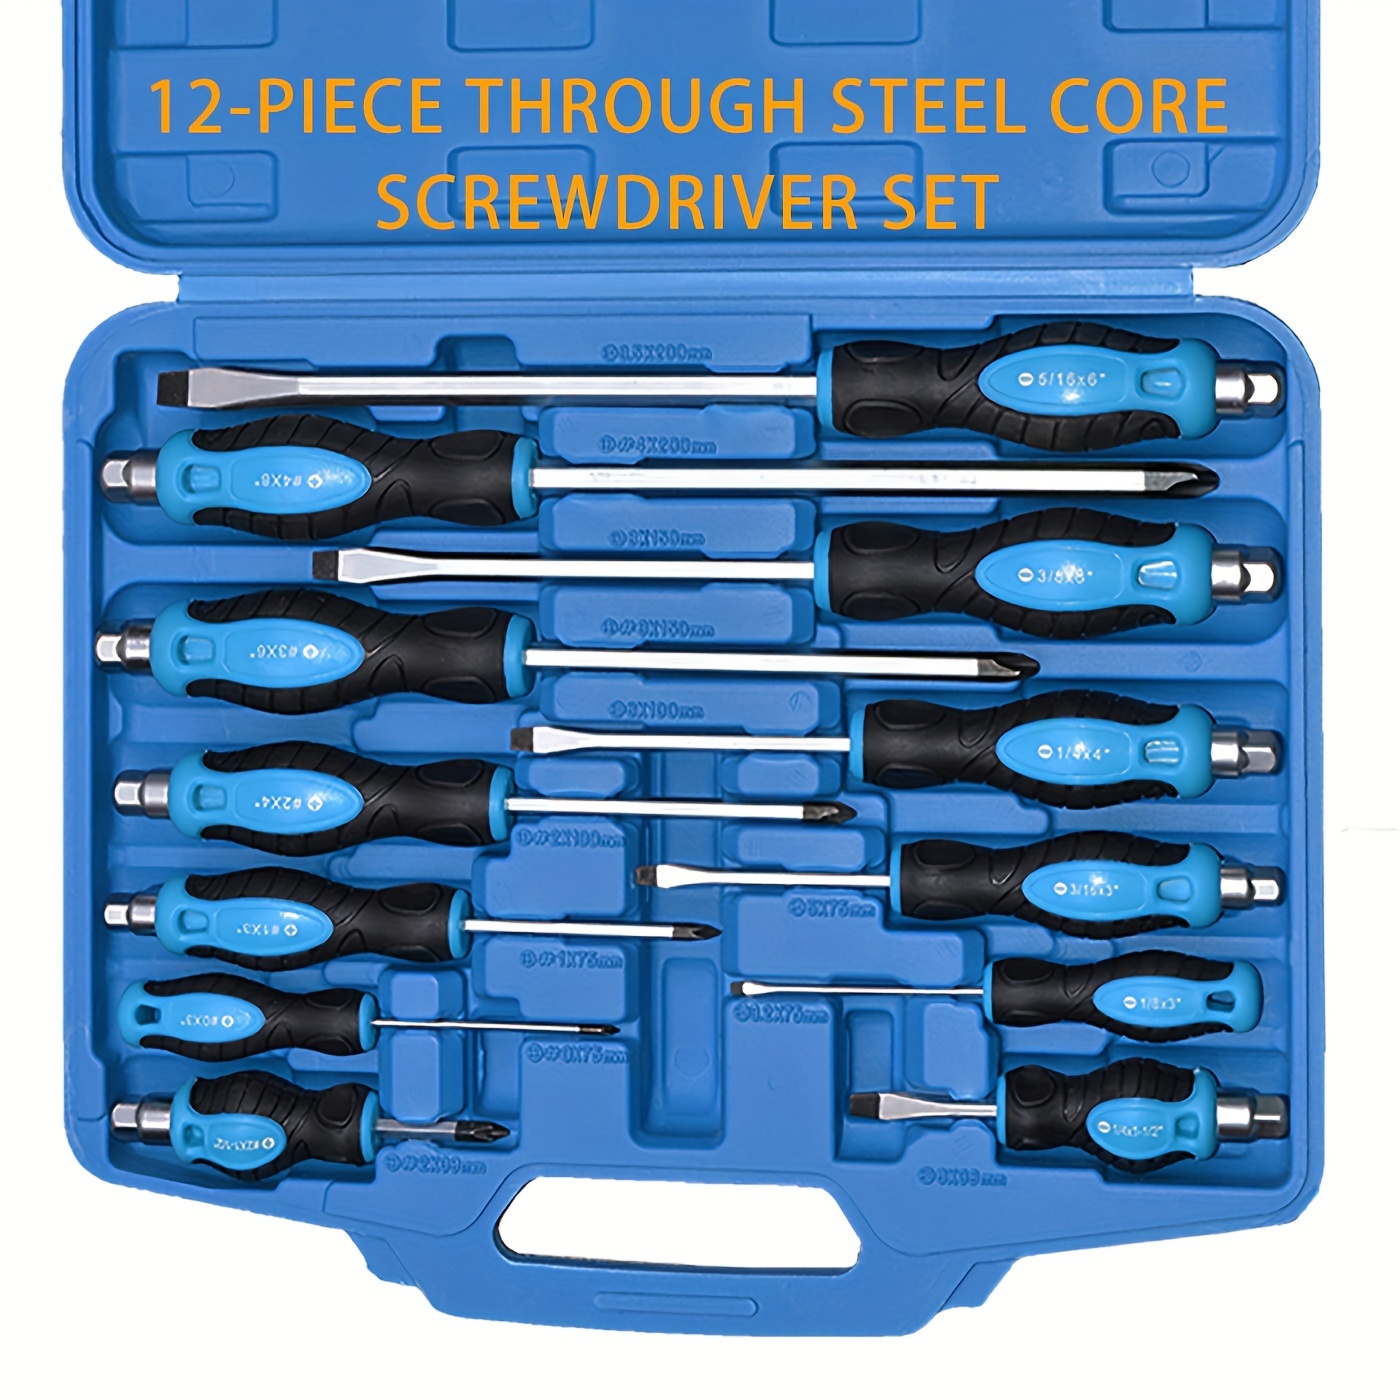 

12-piece Through Steel Core Screwdriver Set, Go-thru Steel Blade High Torque For Fastening, Chiseling Or Loosening Seized Screws, 6 Phillips& 6 Slotted Magnetic Bit, With Carry Case